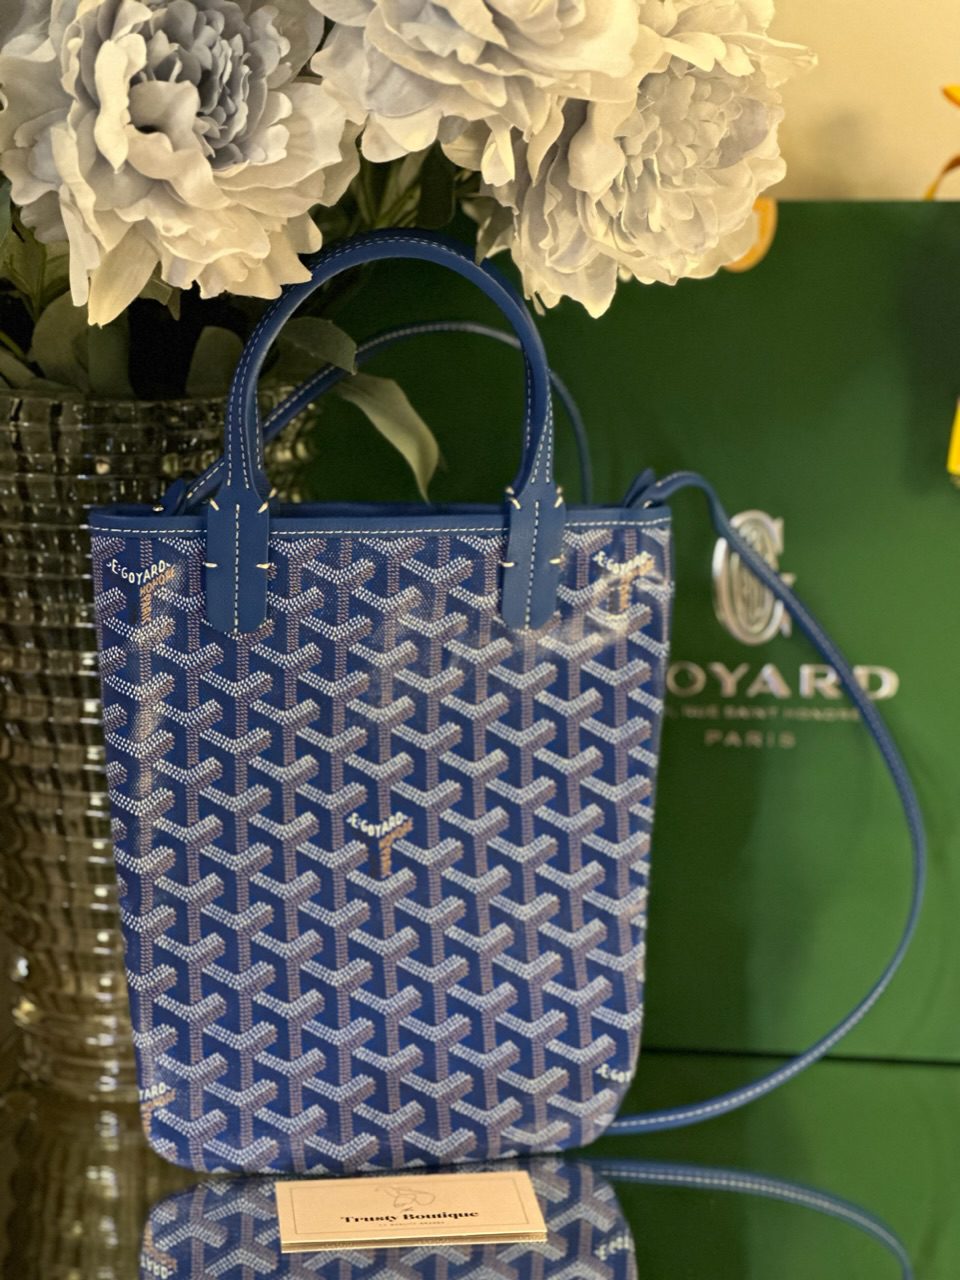 Goyard Poitiers Claire-Voie Bag turquoise blue ⭕️ One available ⭕️  #MT_readystock